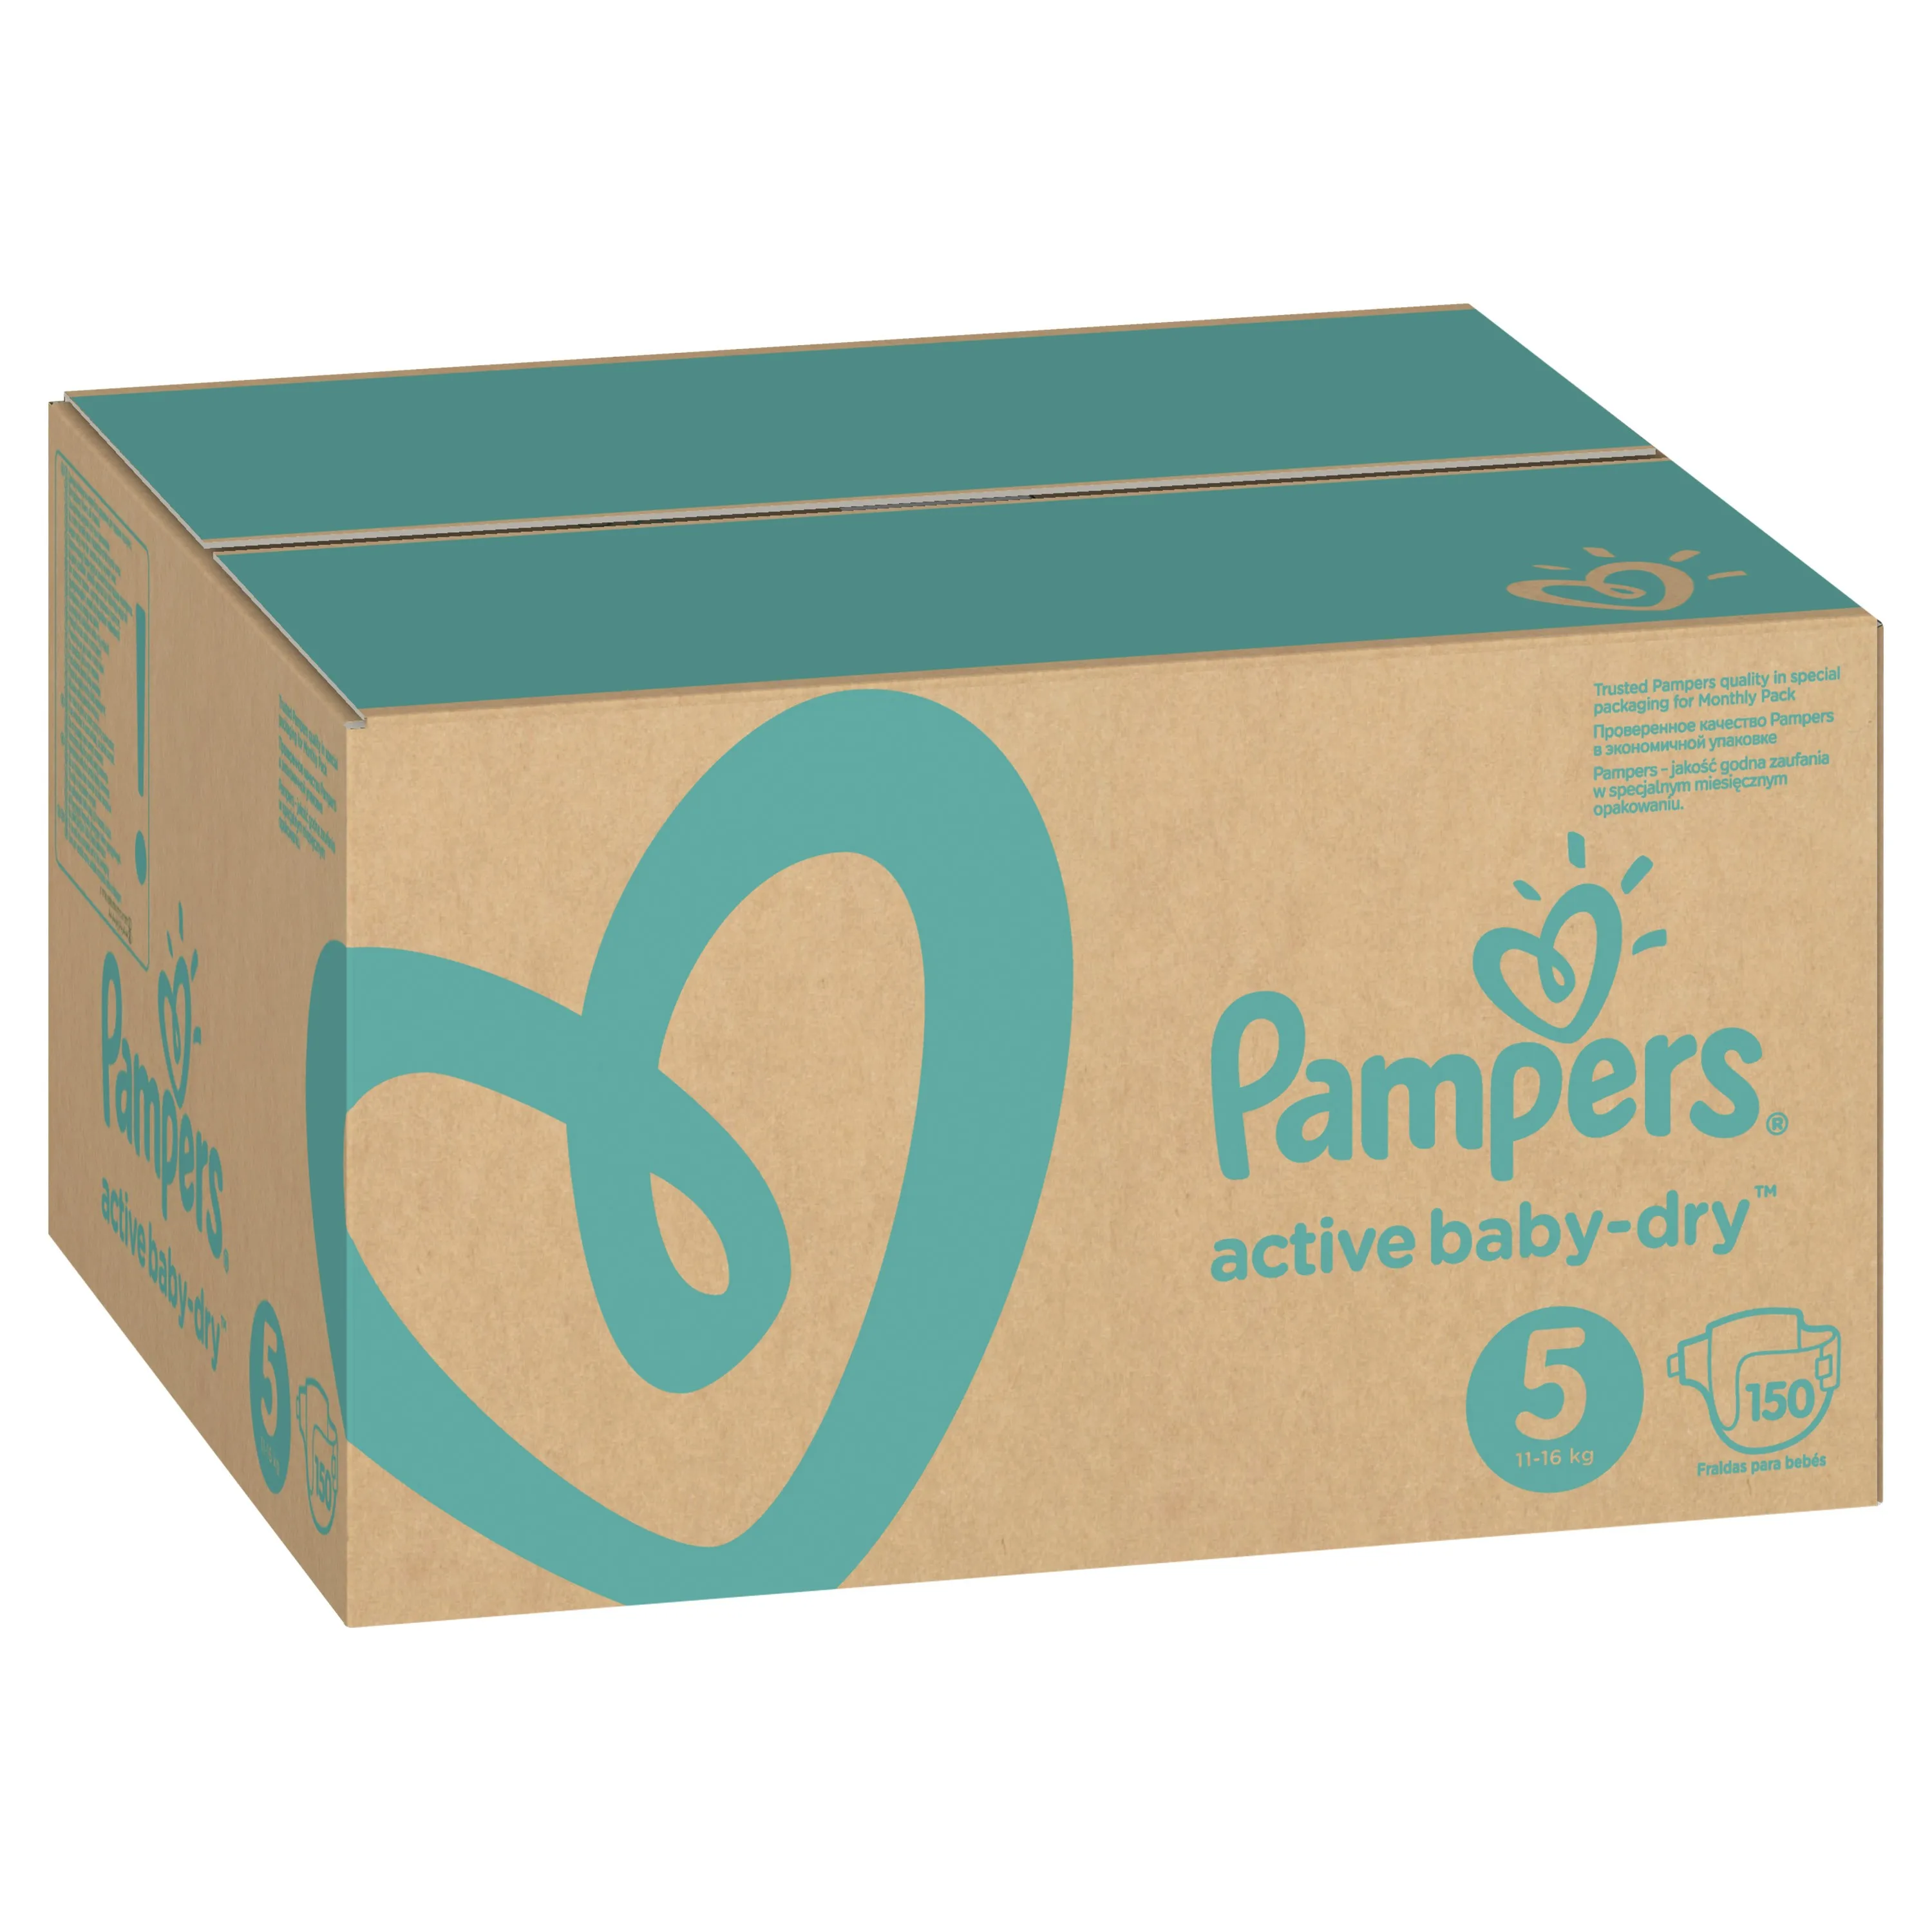 Diapers Pampers Active Baby-Dry 11-16 kg size 5 150pcs. diapers diaper pampers papers for children girls boys babies | Мать и ребенок